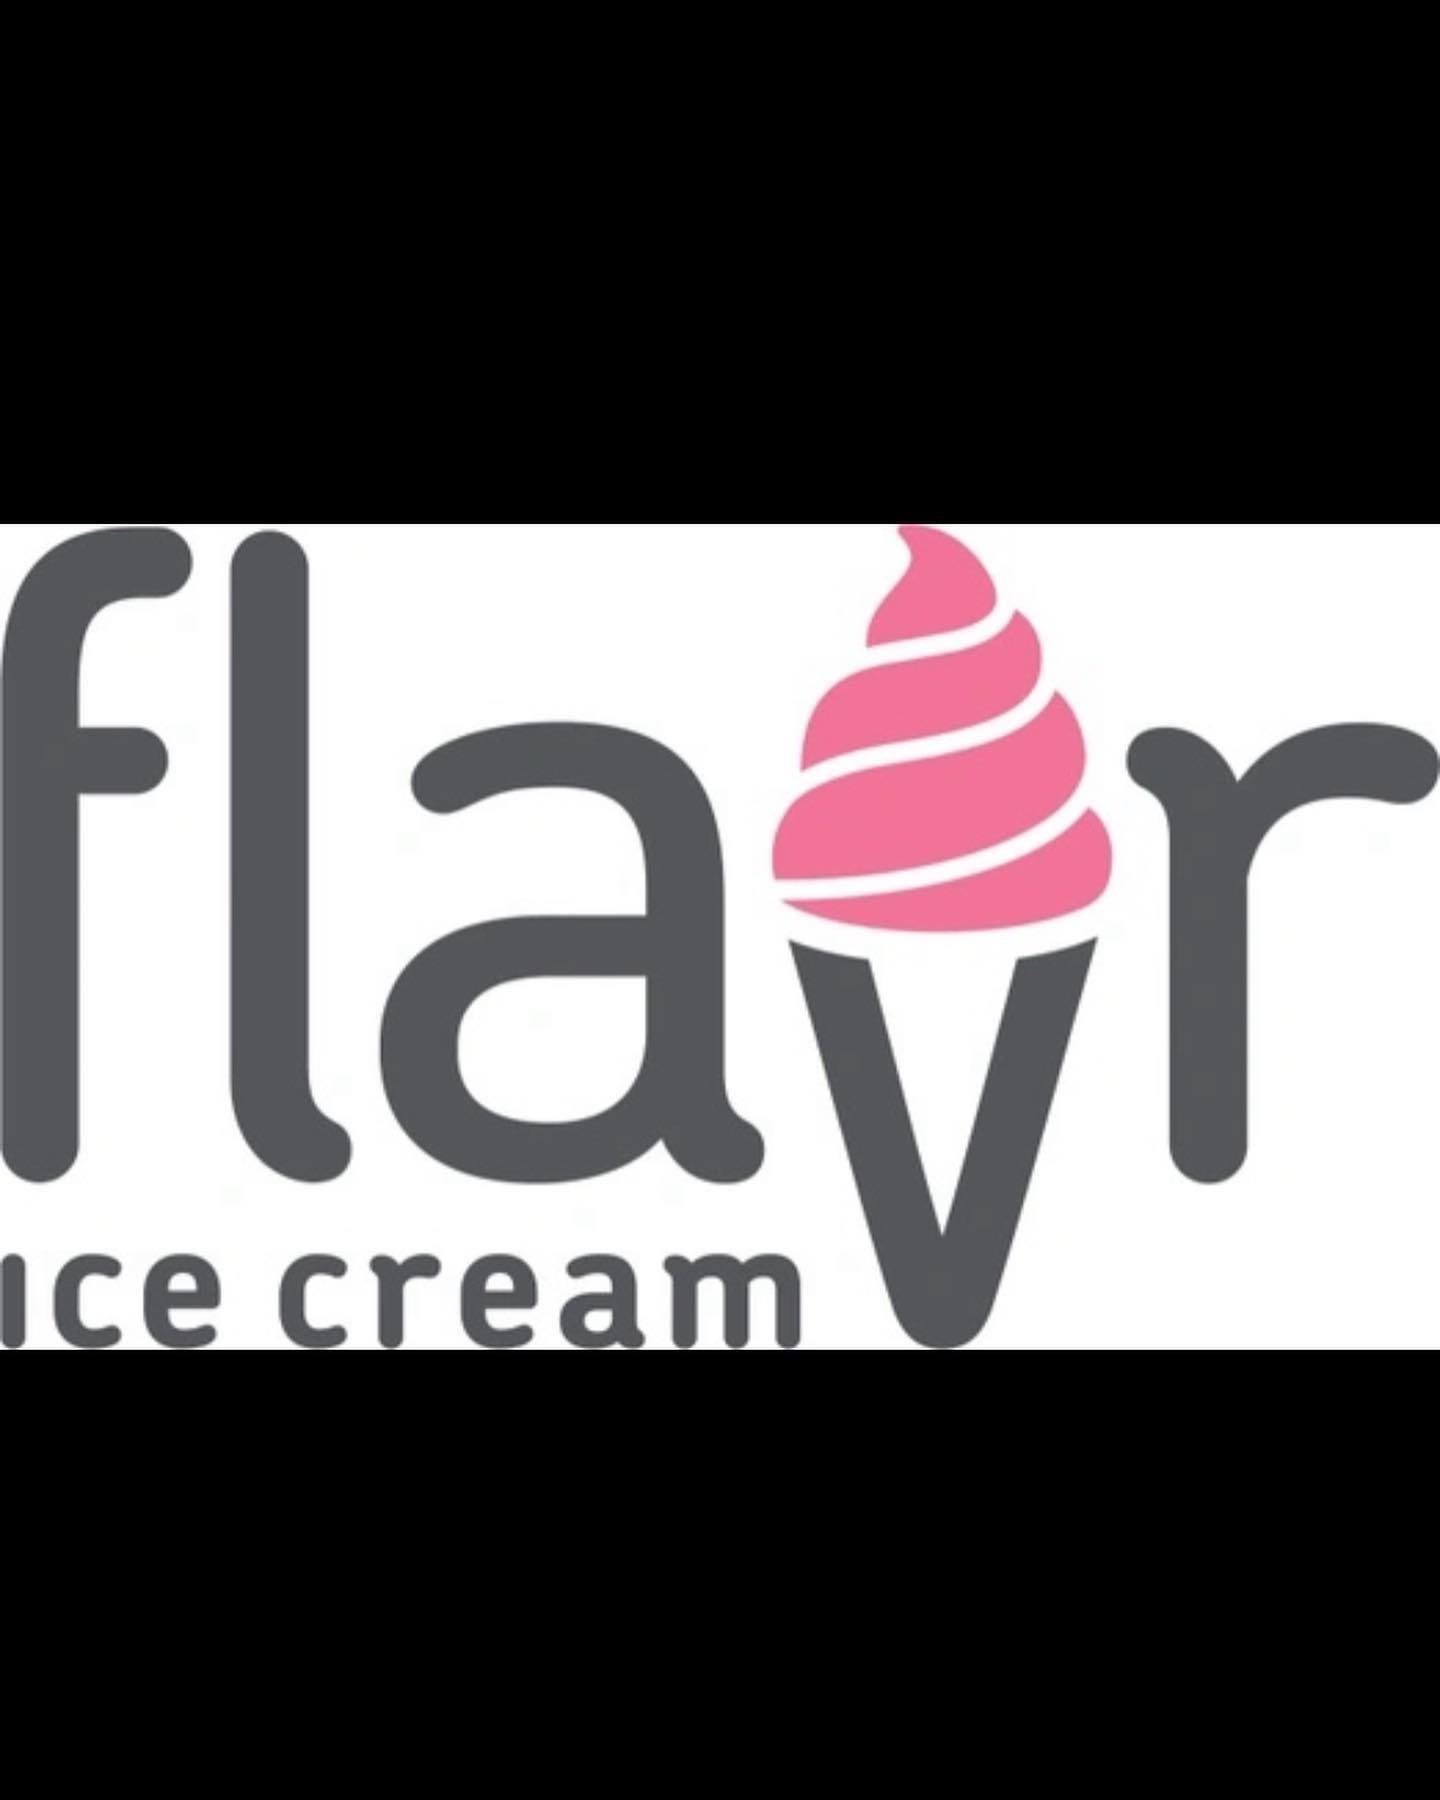 Rough-in completed at @flavricecream in Murrayville, Langley. We&rsquo;re excited for this place to open for obvious reasons 🍦